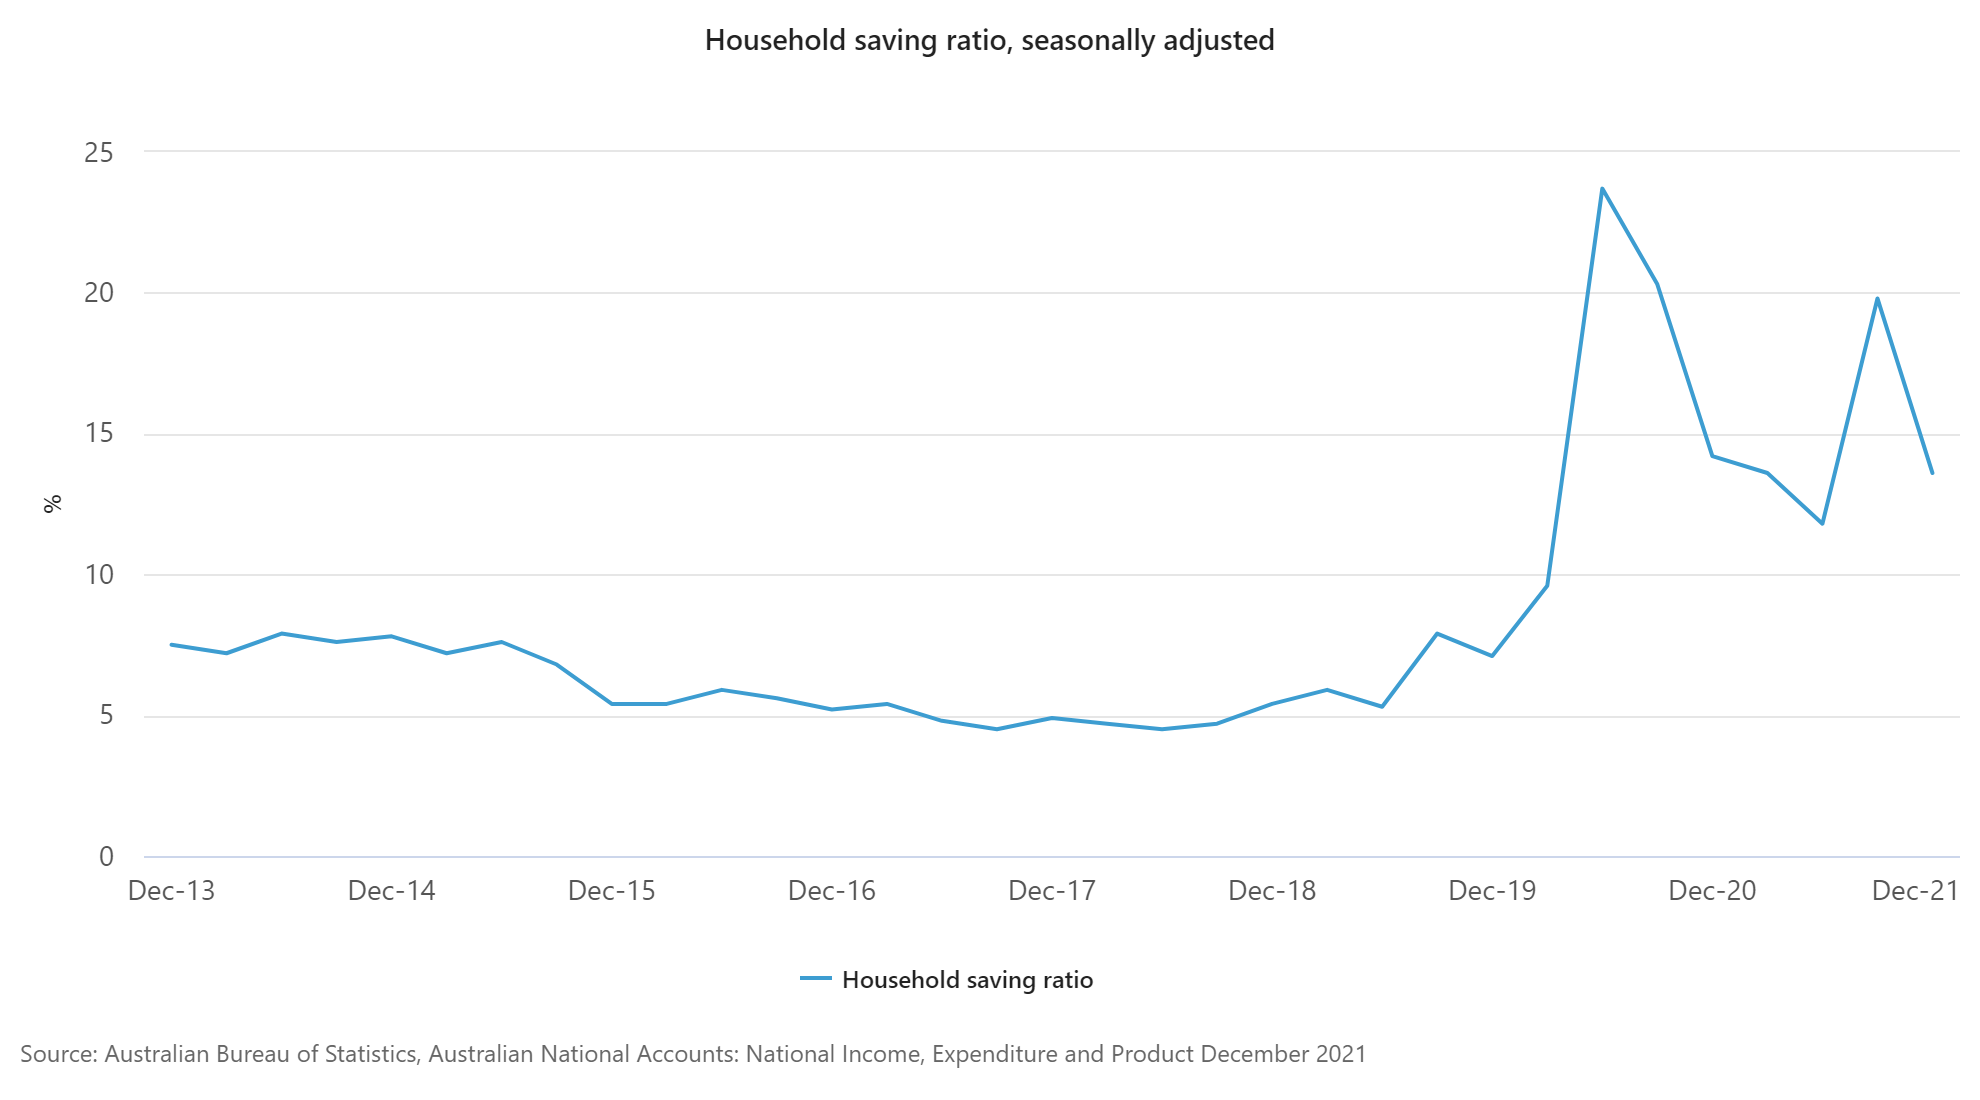 Household saving has fallen back from lockdown peaks, but remains well above pre-pandemic levels.